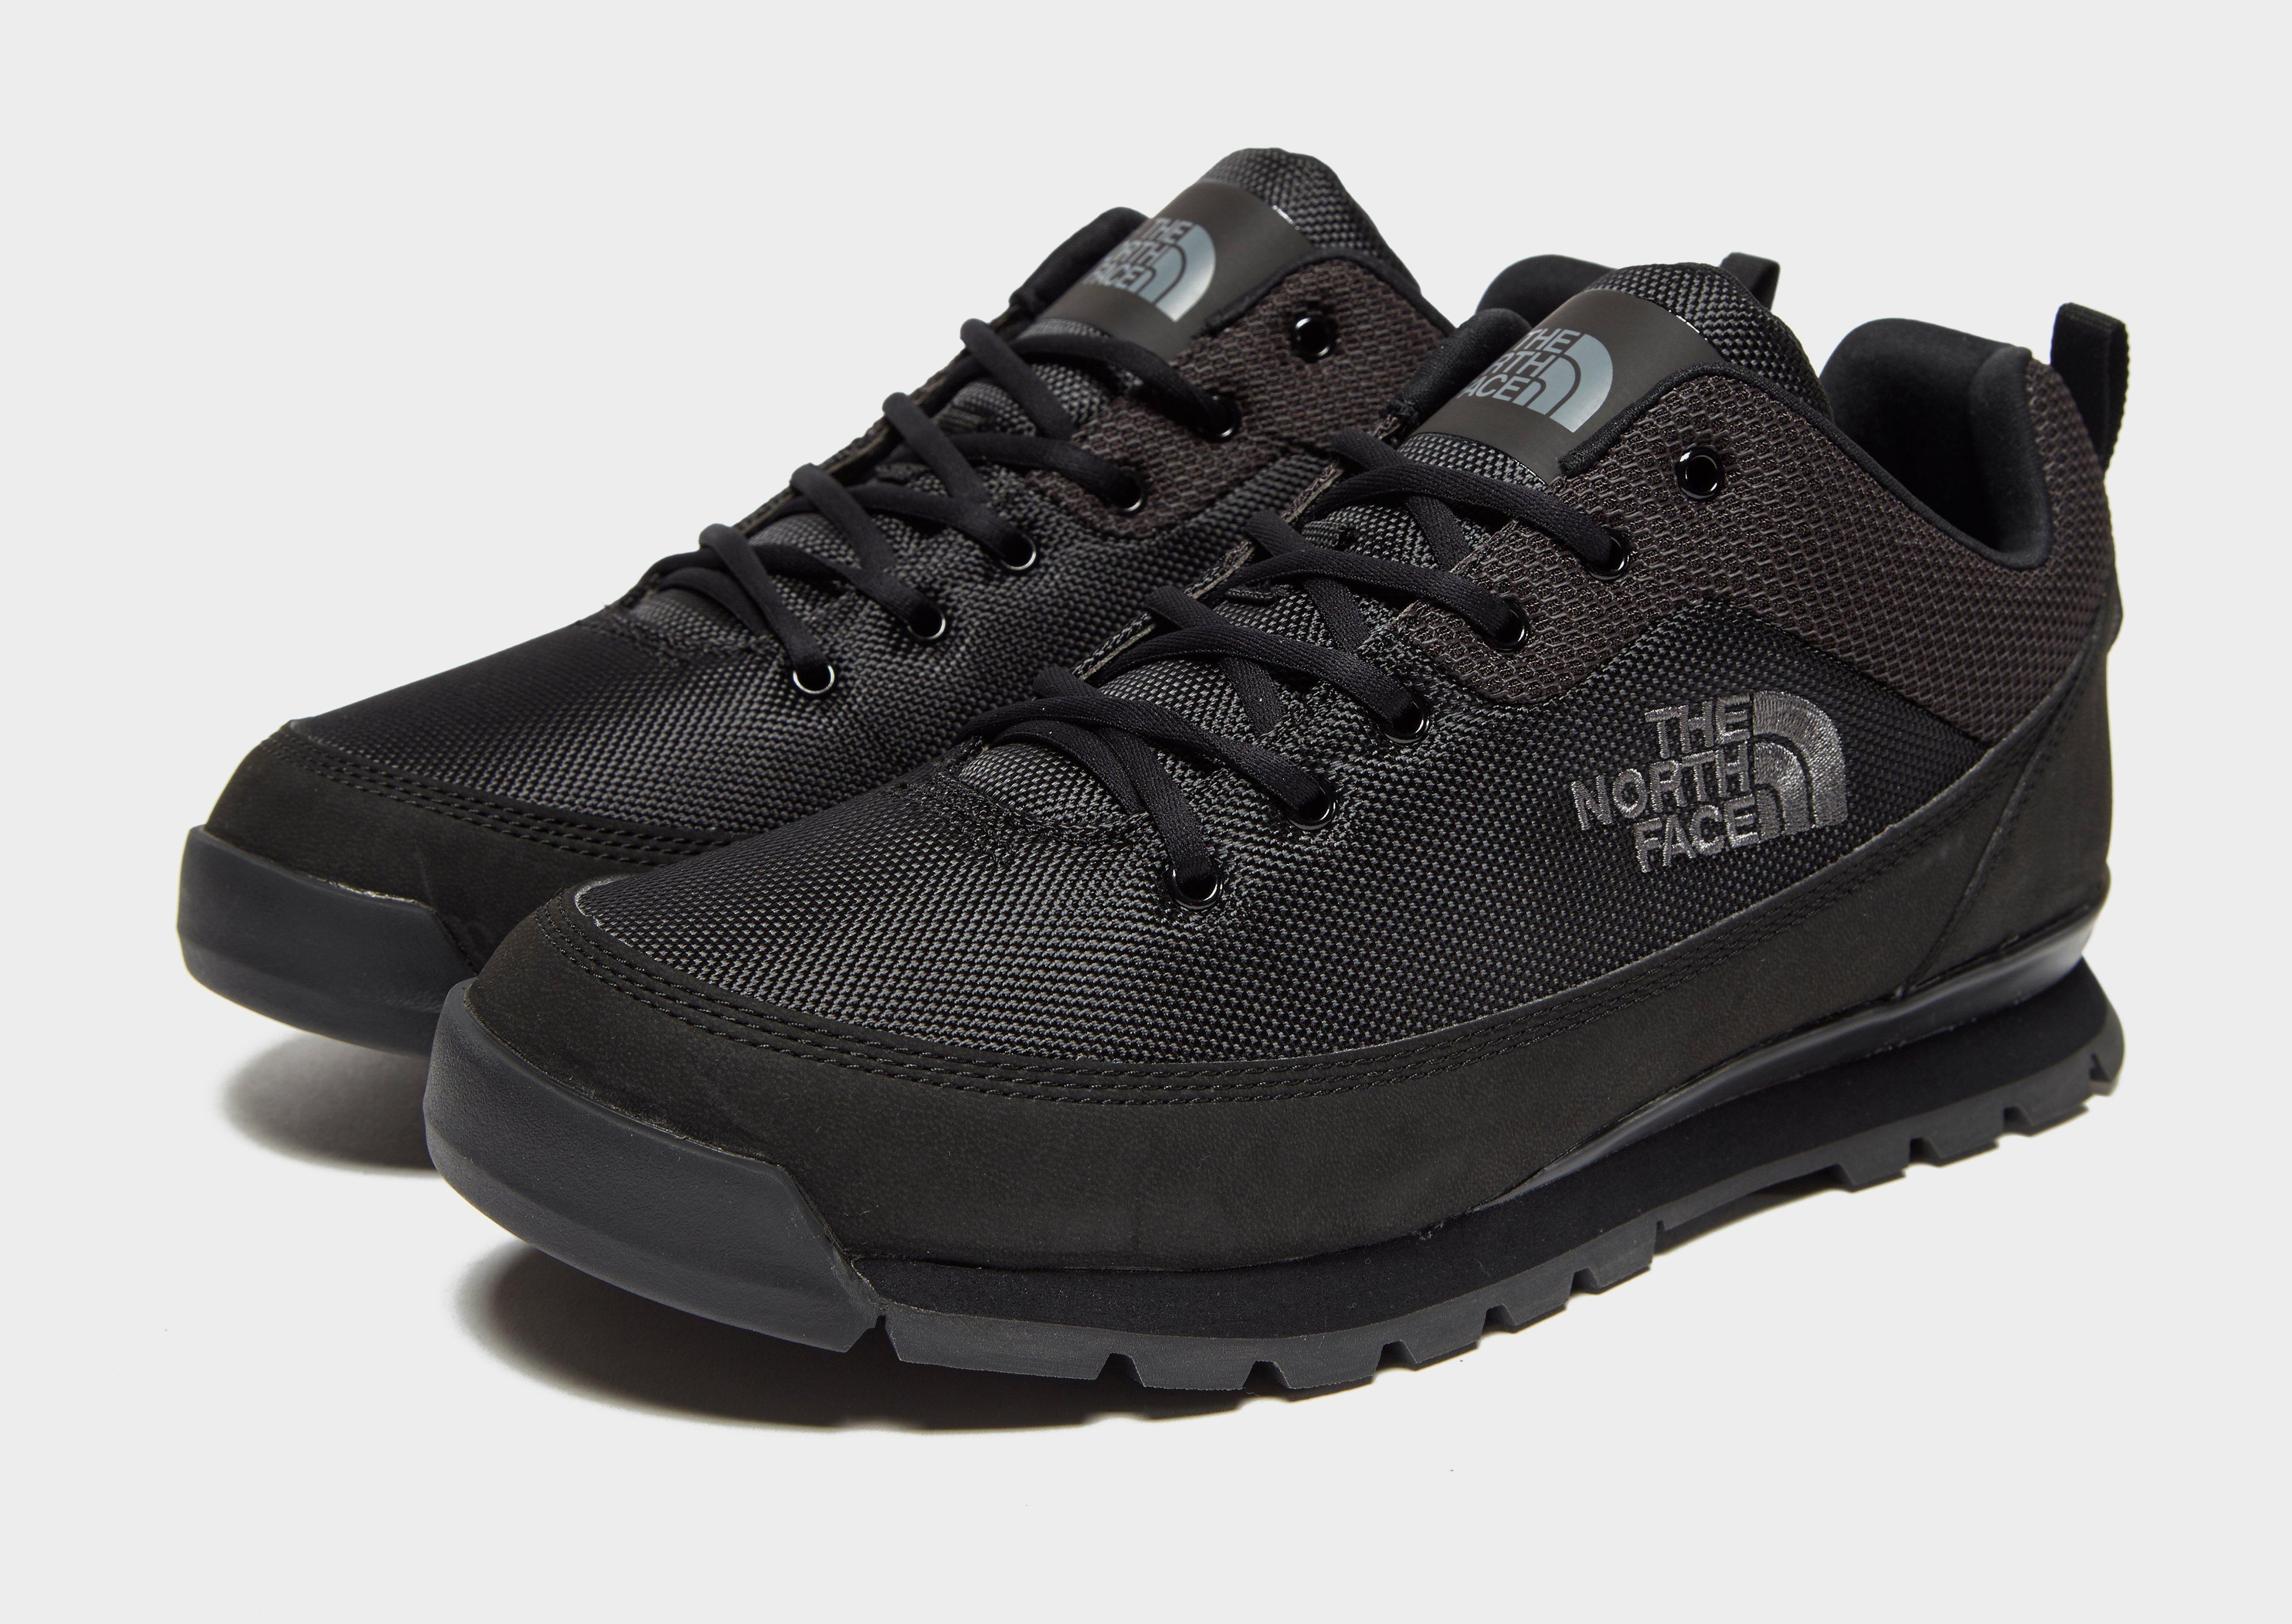 north face back to berkeley mesh low